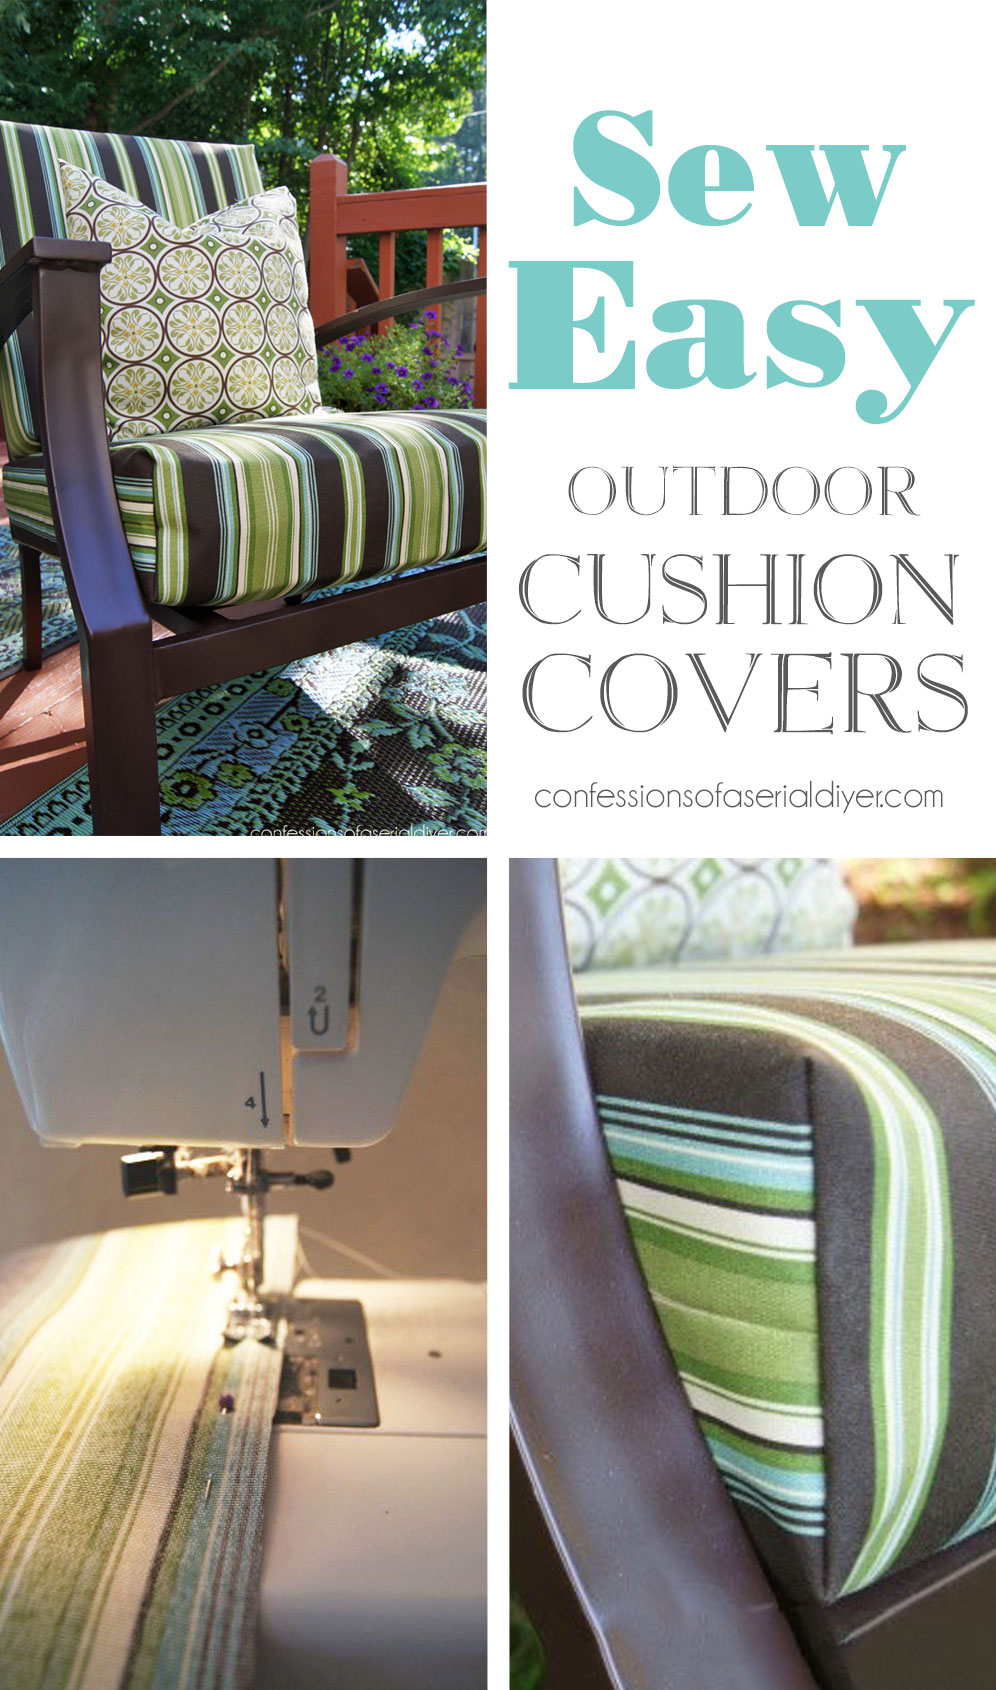 Sew Easy Outdoor Cushion Covers, How To Get Mildew Off Outdoor Cushion Covers